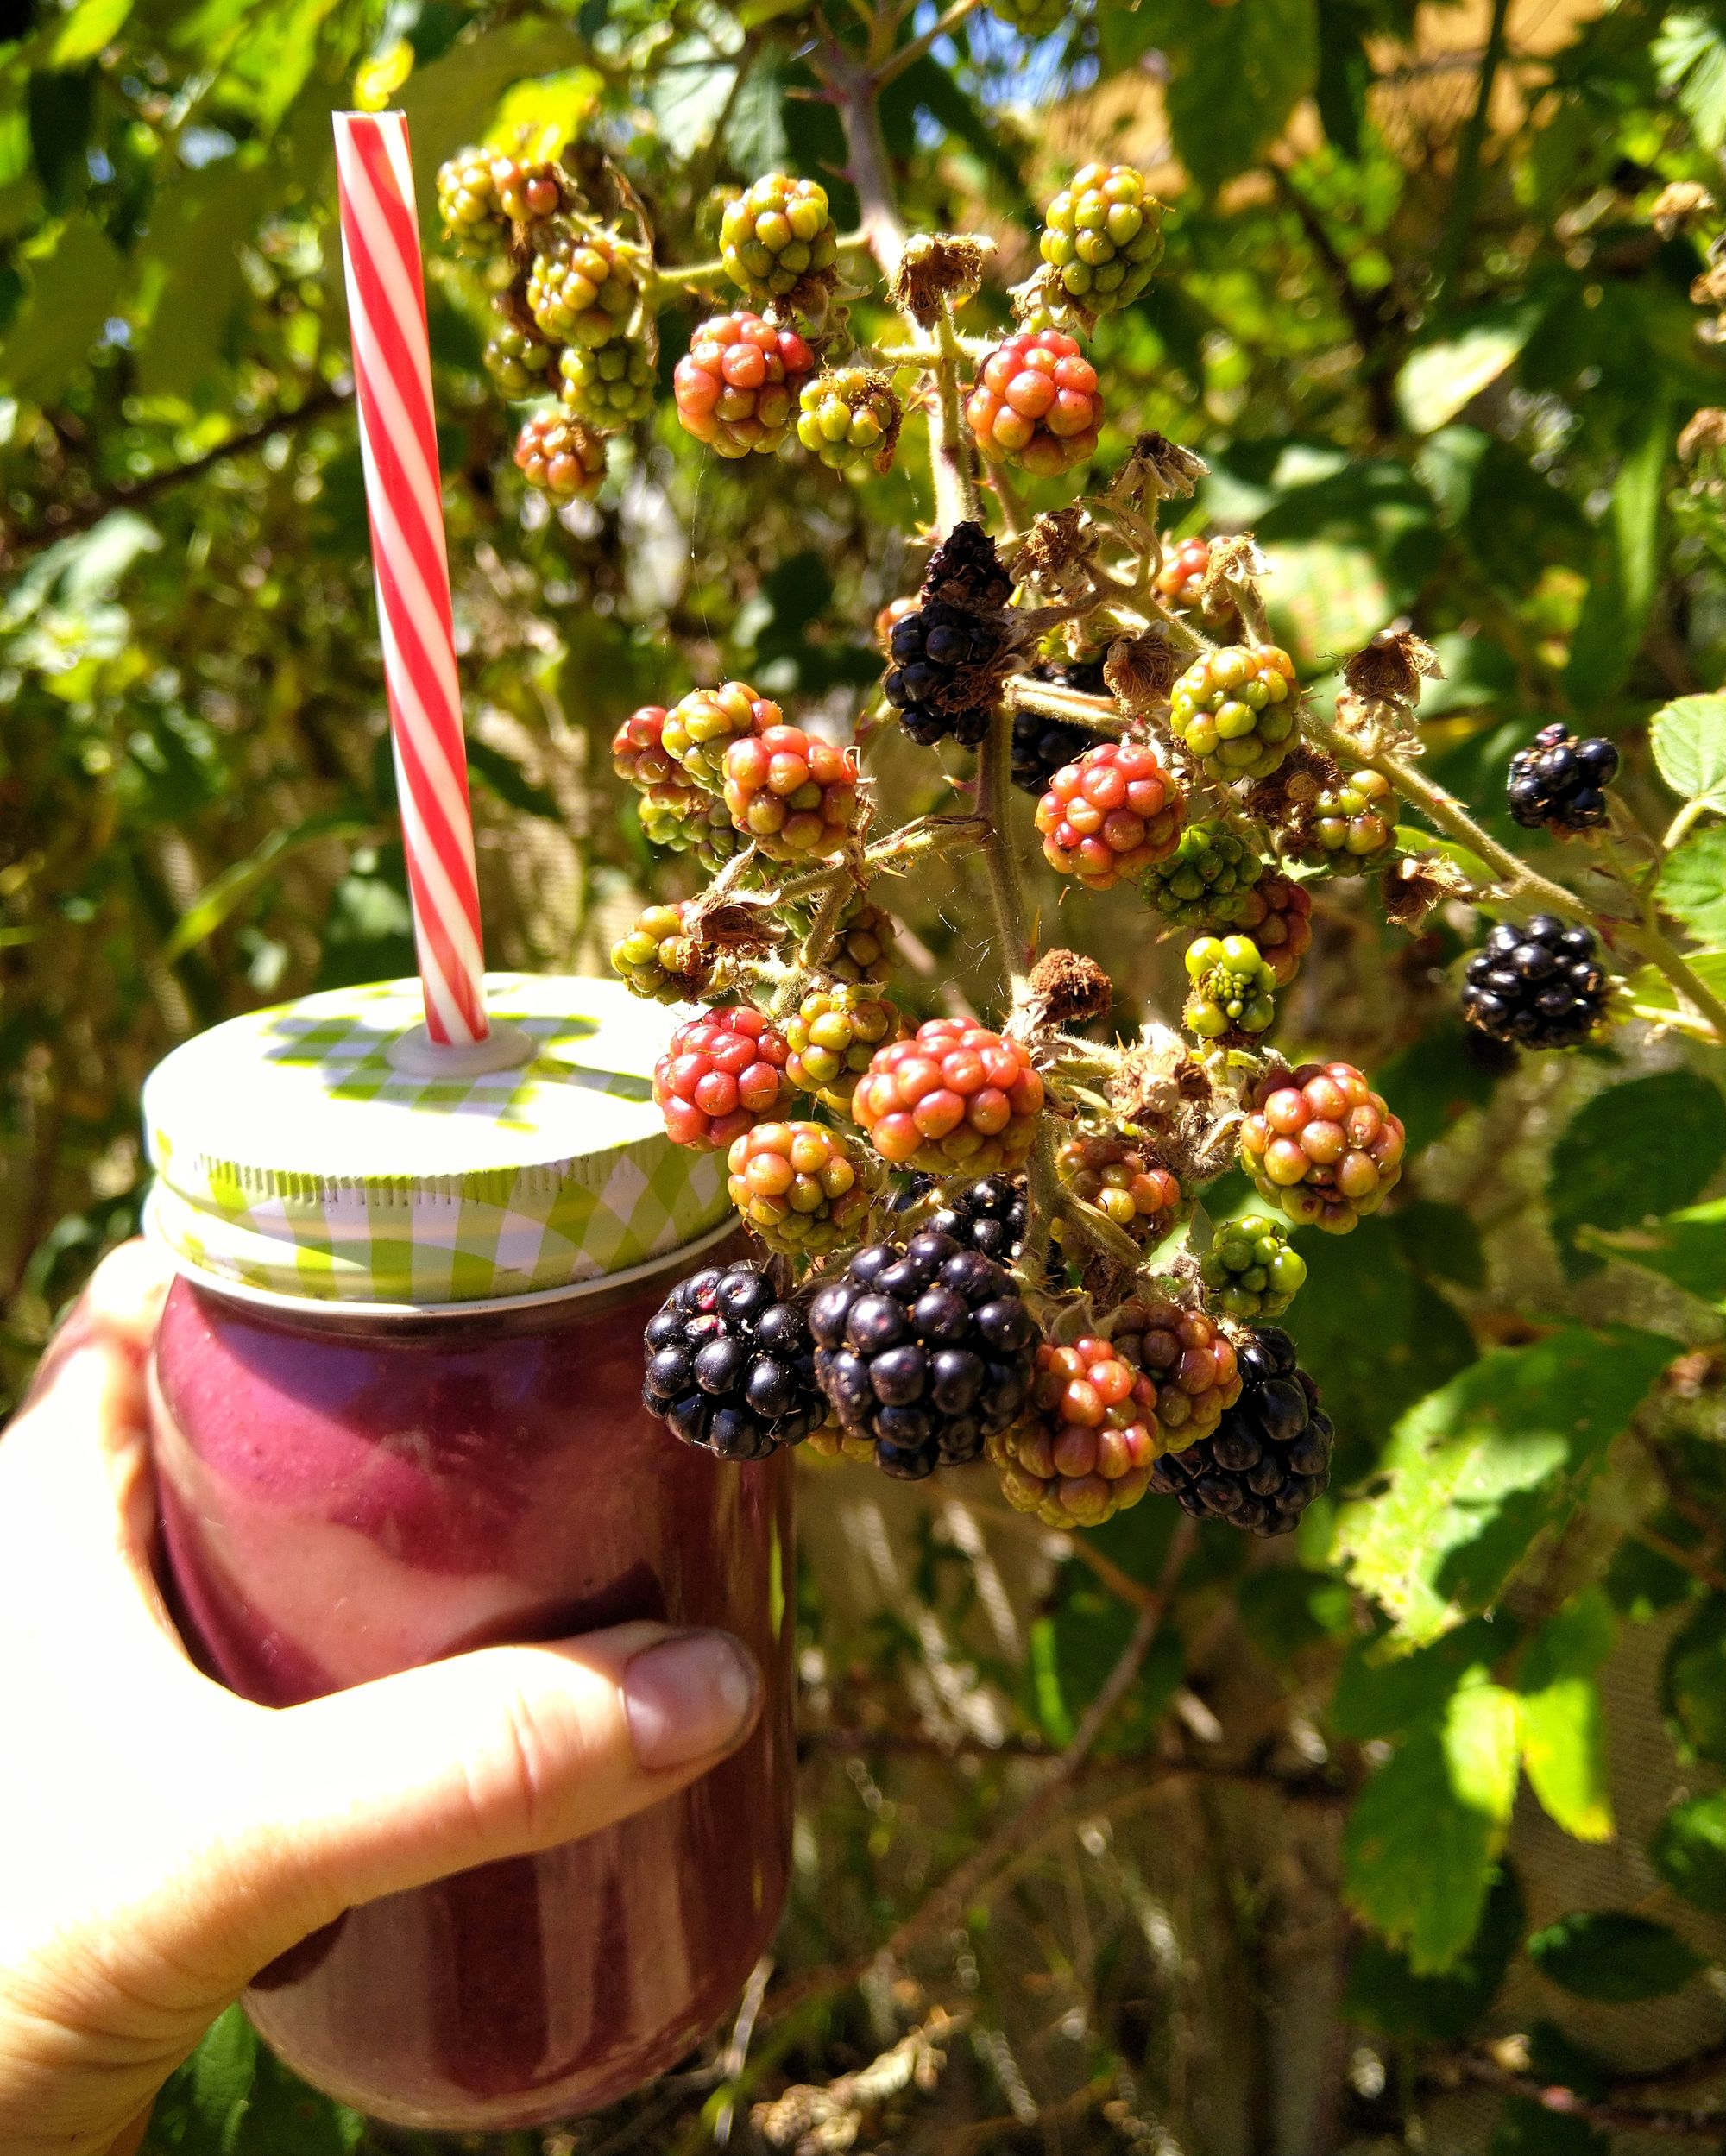 Back to the fruiting wall in the sun where it all began. Drink up! - Victoria Waghorn